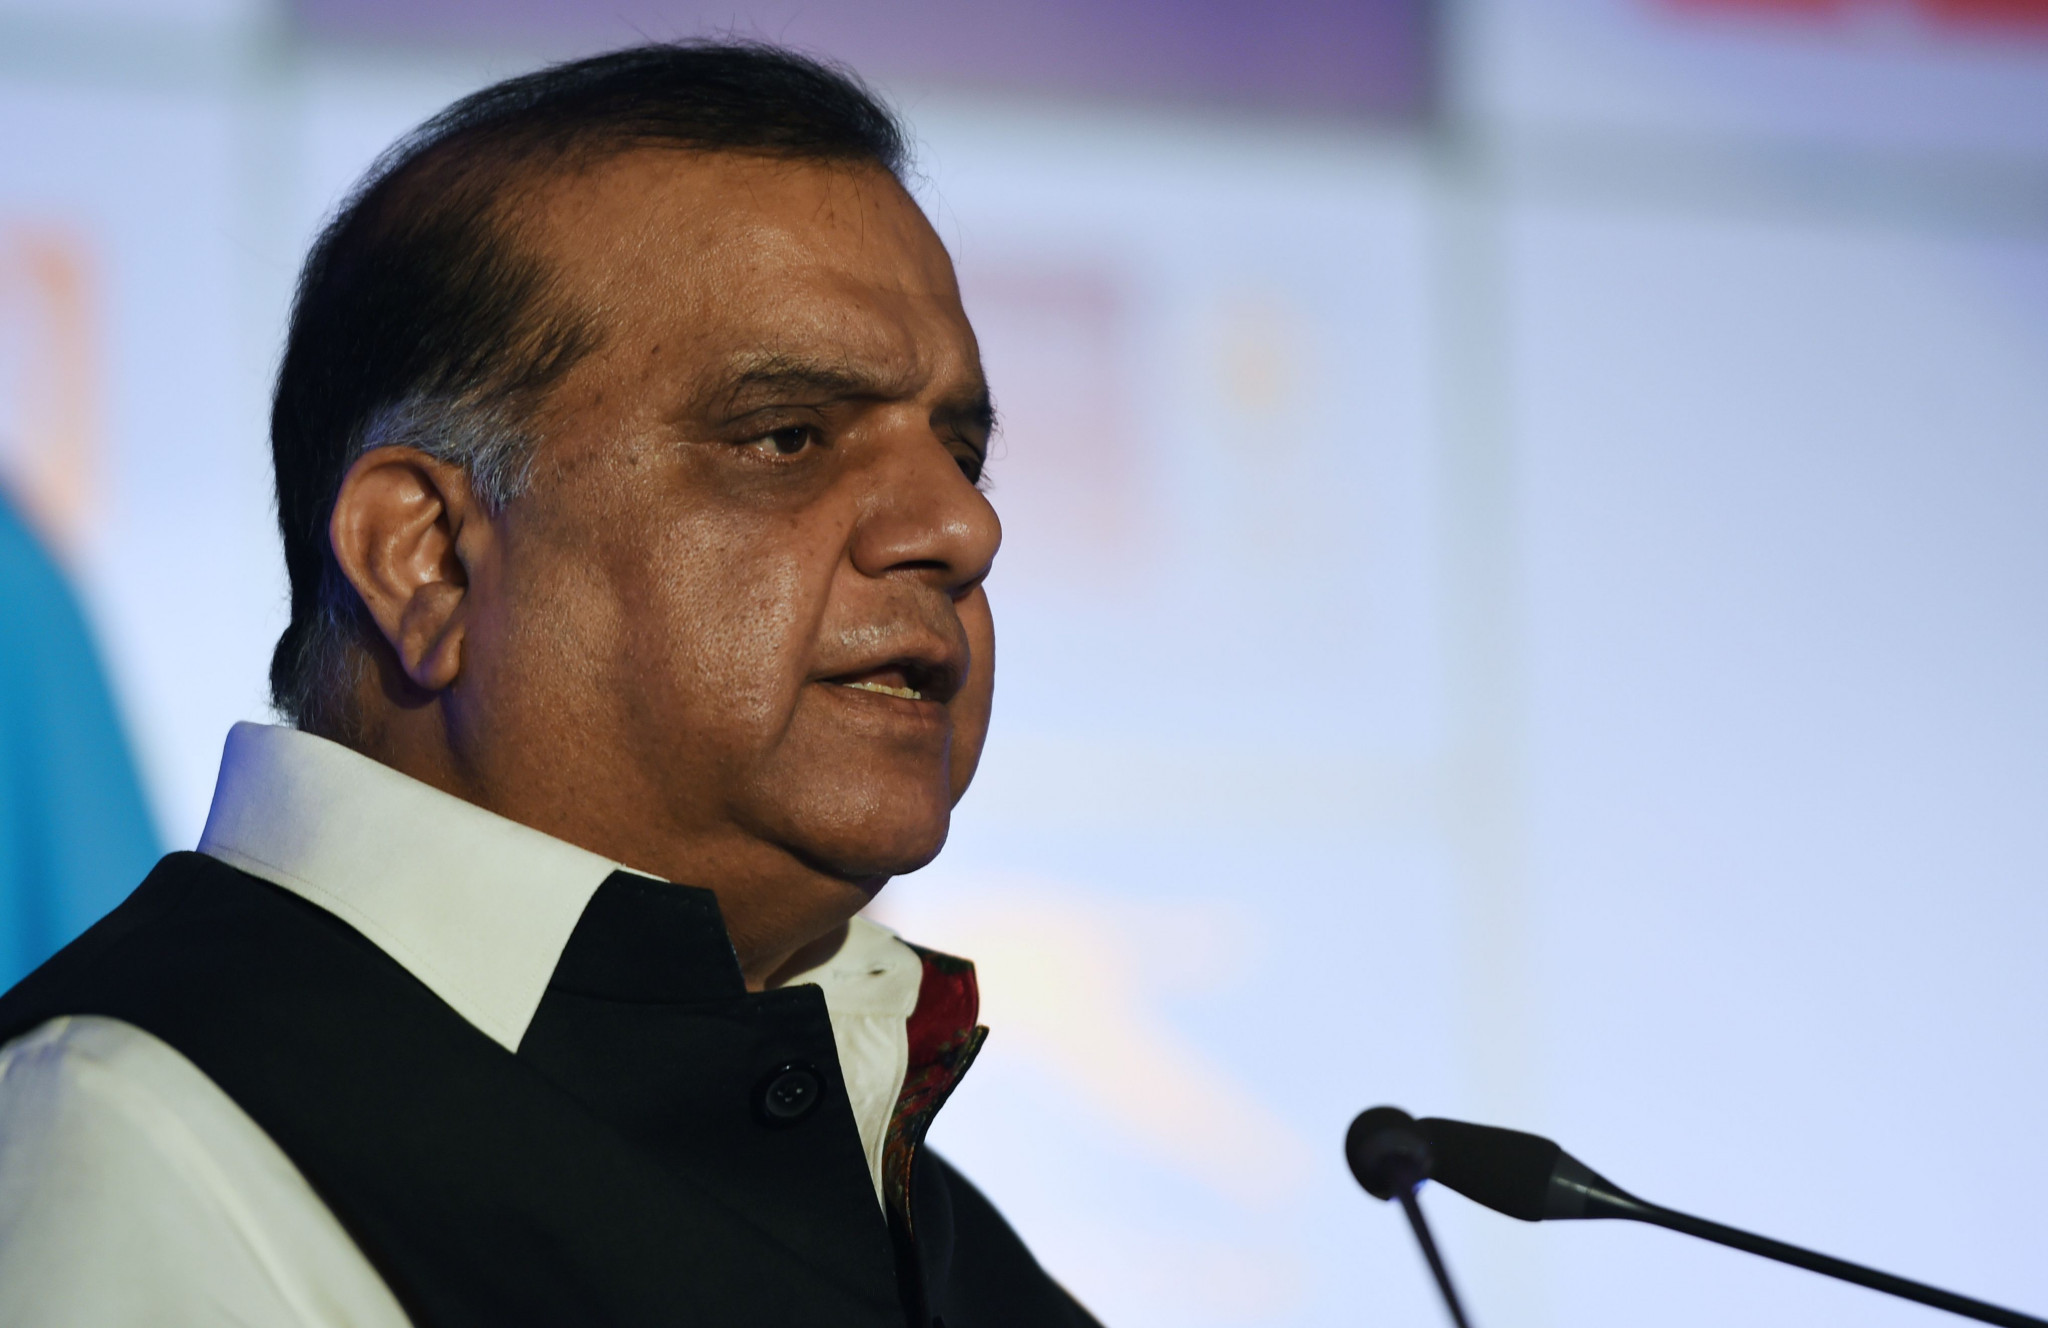 Marc Coudron lost in the 2021 FIH Presidential election to Narinder Batra, pictured, who has subsequently resigned ©Getty Images